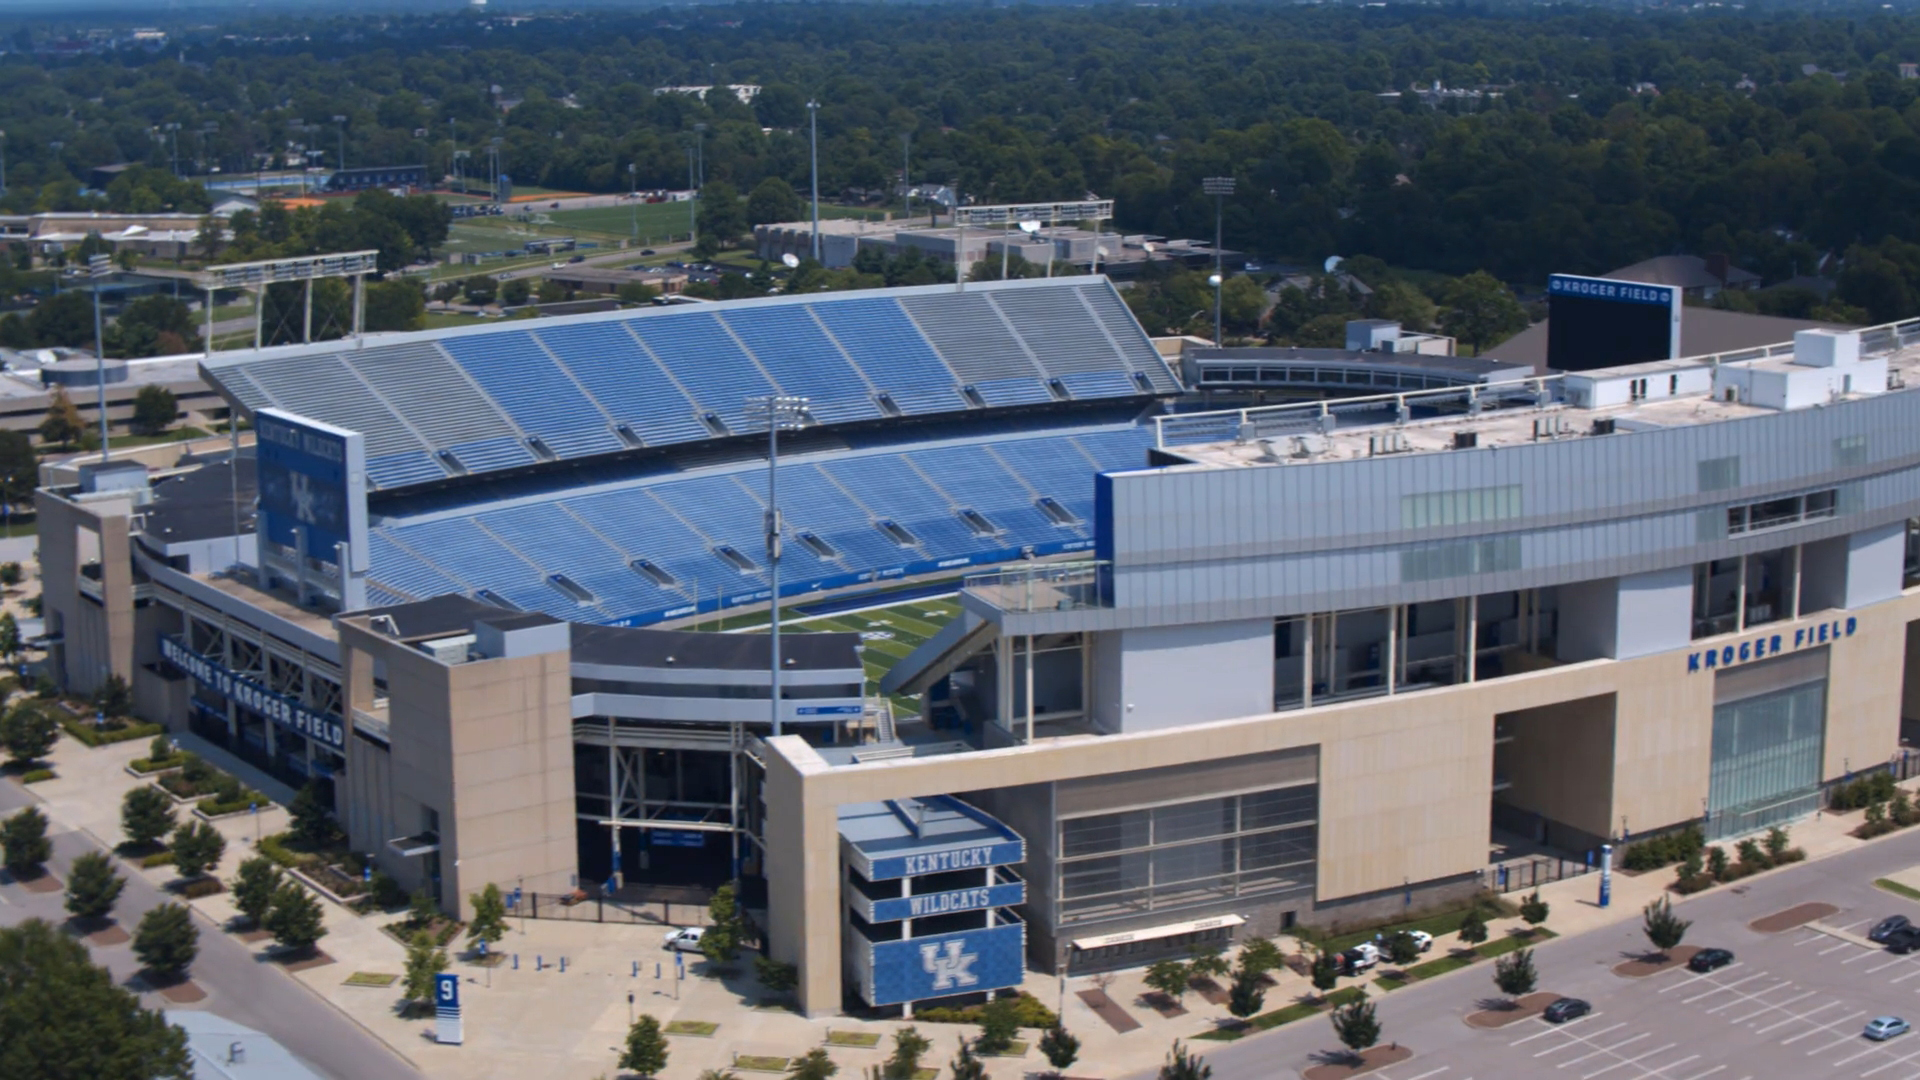 Kroger Field on the Campus of the University of Kentucky